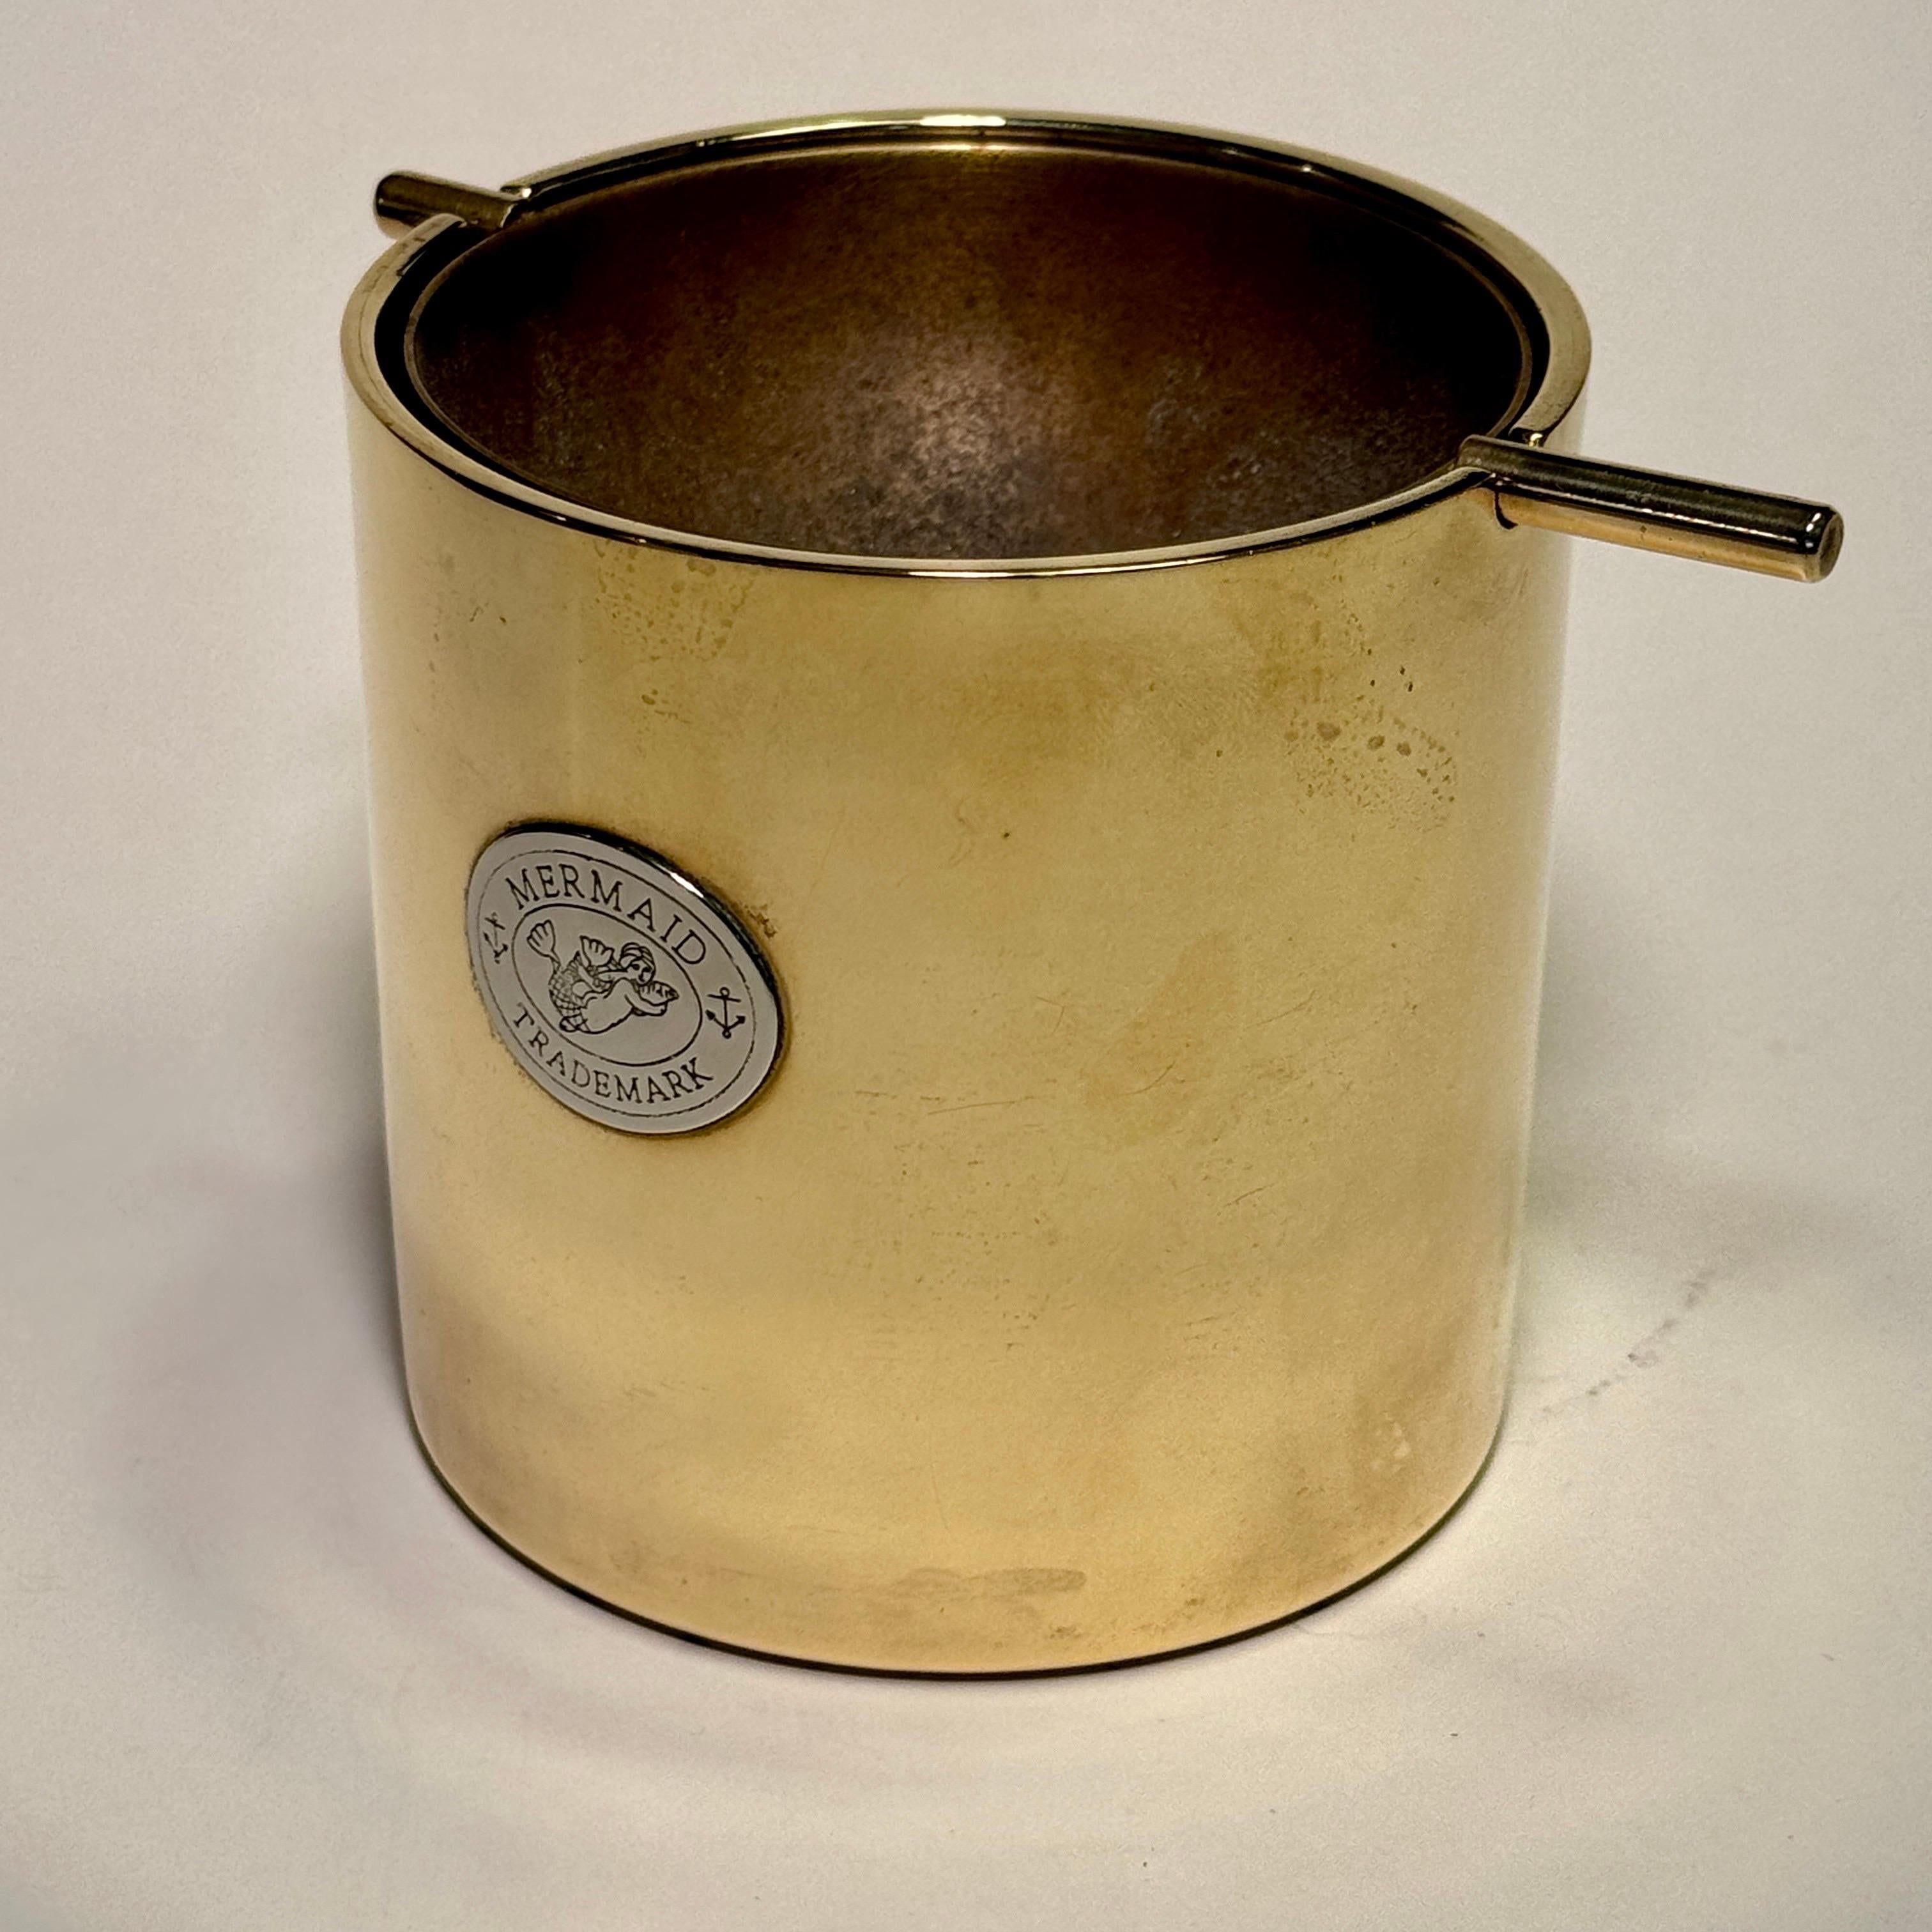 Tall Thick Solid Brass Ashtray by Arne Jacobsen For Stelton, Denmark 1960's For Sale 5